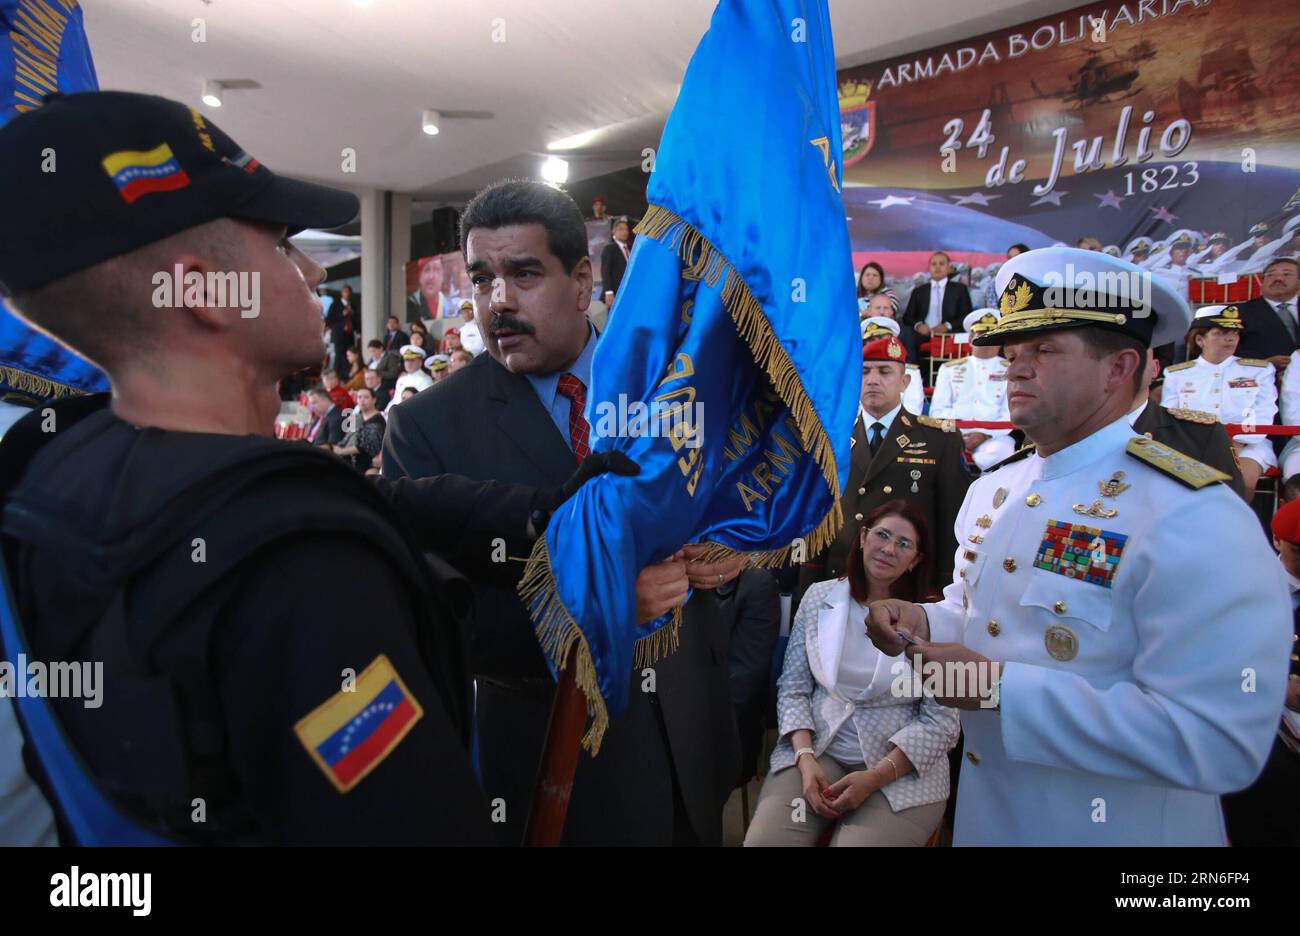 (150725) -- VARGAS,  - Image provided by shows Venezuelan President Nicolas Maduro (C) attending the ceremony in commemoration of the 192th anniversary of the naval battle of Lake Maracaibo, in the Ana Maria Campos Naval Base, in Catia La Mar, Vargas state, Venezuela, on July 24, 2015. ) VENEZUELA-VARGAS-POLITICS-MADURO VENEZUELA SxPRESIDENCY PUBLICATIONxNOTxINxCHN   150725 Vargas Image provided by Shows Venezuelan President Nicolas Maduro C attending The Ceremony in Commemoration of The 192th Anniversary of The Naval Battle of Lake Maracaibo in The Ana Mary Campos Naval Base in Catia La Mar V Stock Photo